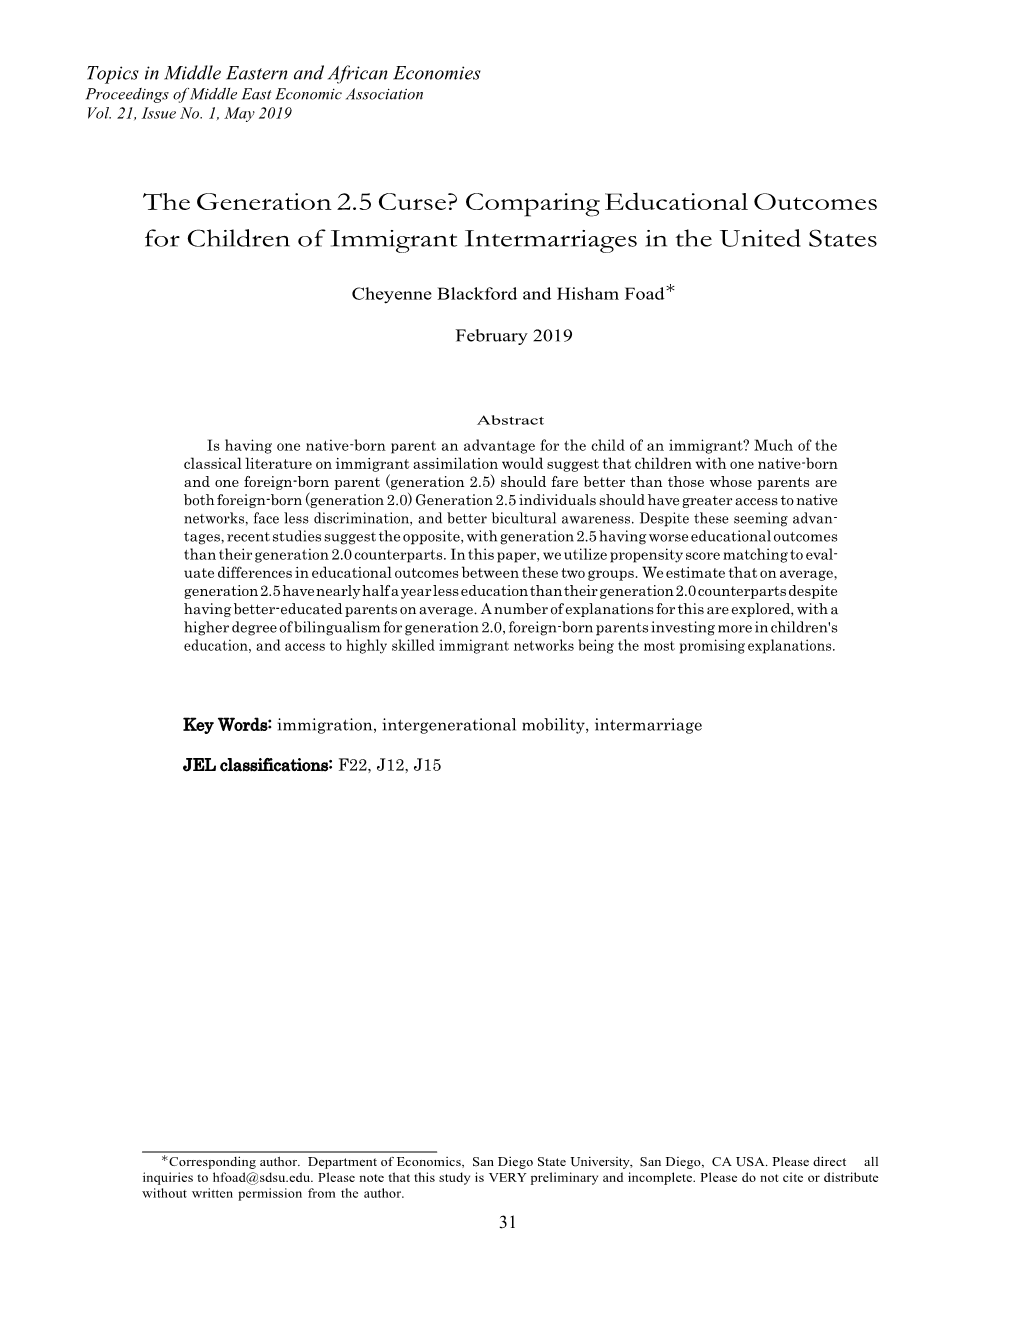 The Generation 2.5 Curse? Comparing Educational Outcomes for Children of Immigrant Intermarriages in the United States